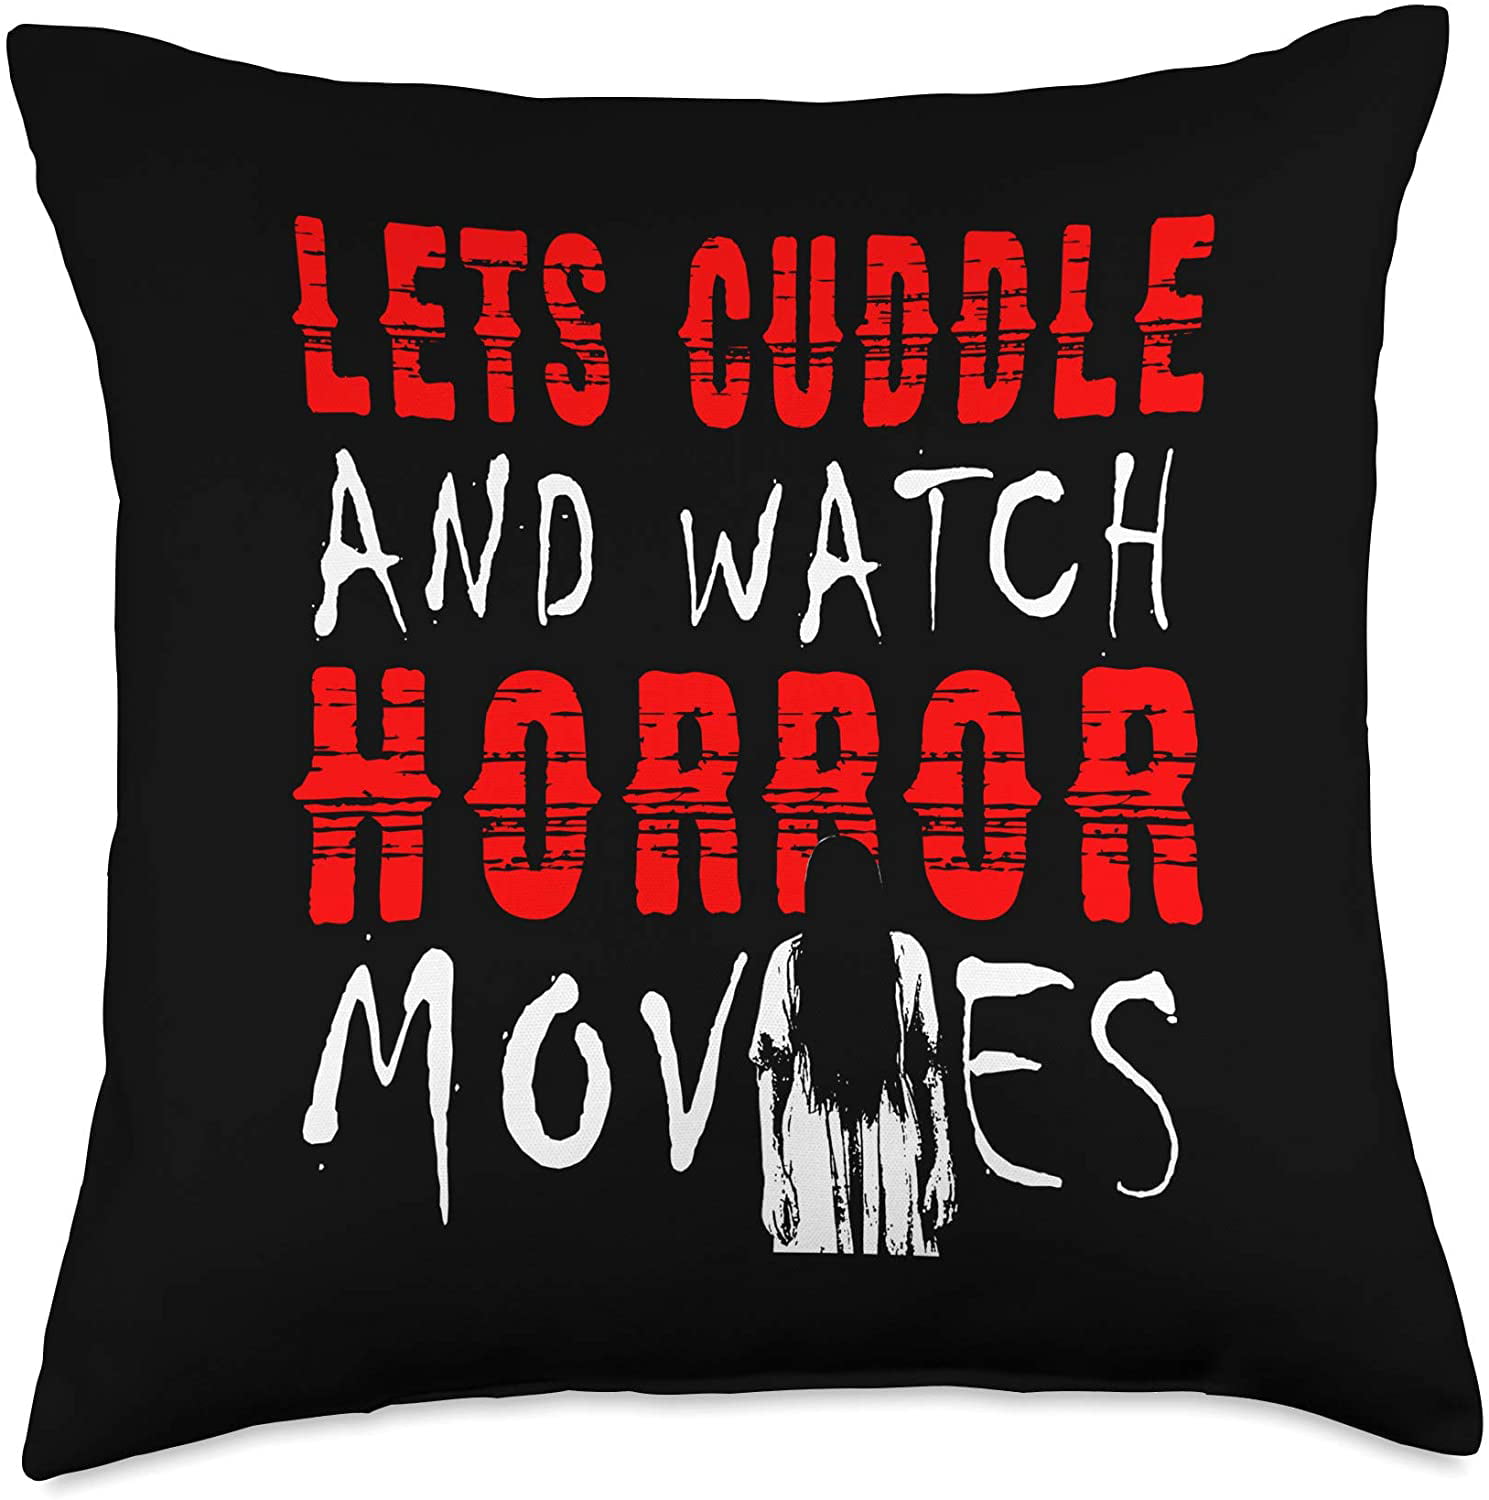 Let's Snuggle and Watch Scary Movies Pumpkin & Pillow Set Brand Cheap